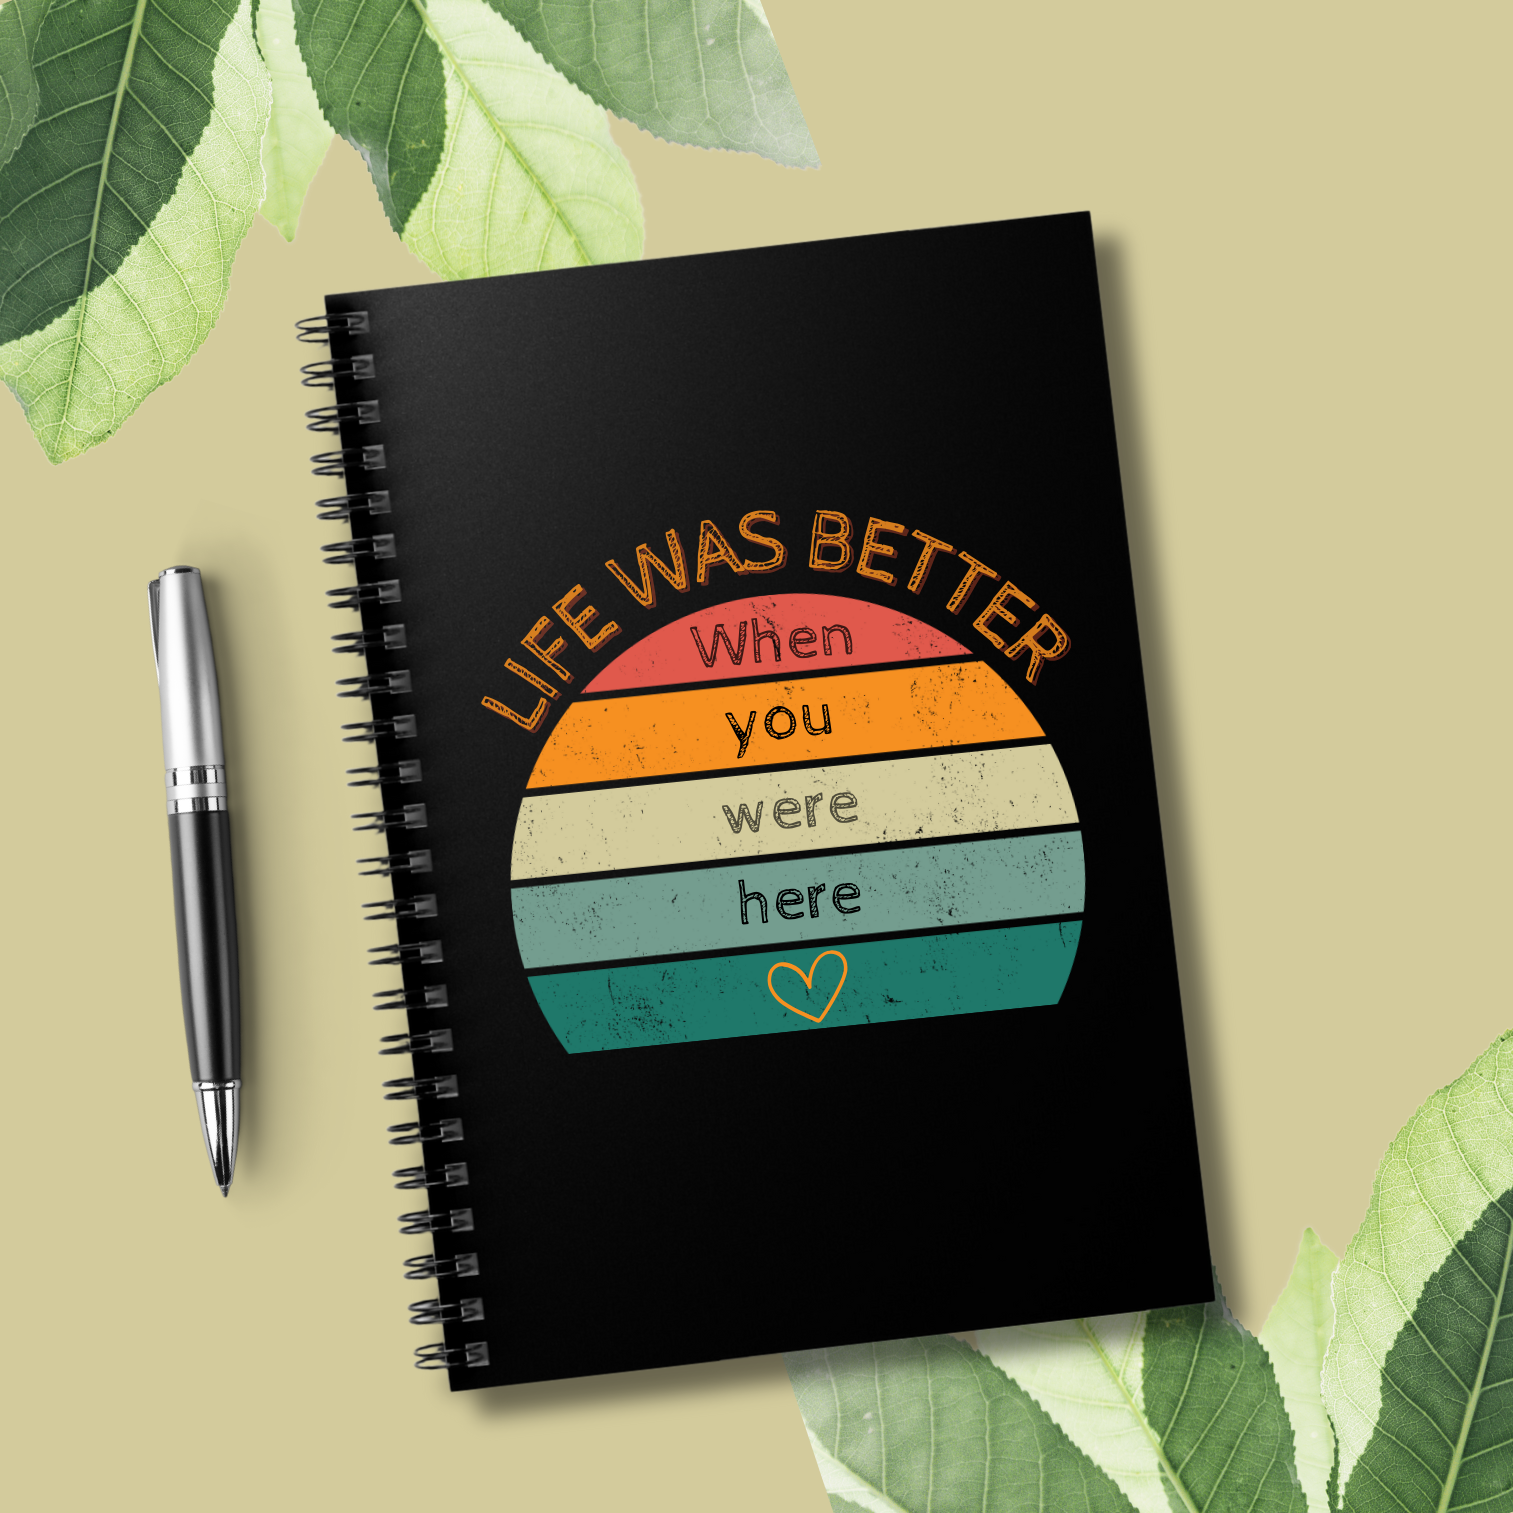 A lovely small spiral journal with a sweet tribute to your lost loved one. Useful for jotting down your thoughts, ideas and feelings, or just a beautiful design to remind you of your loved one as you take school notes, make helpful lists or just record simple daily reminders. 